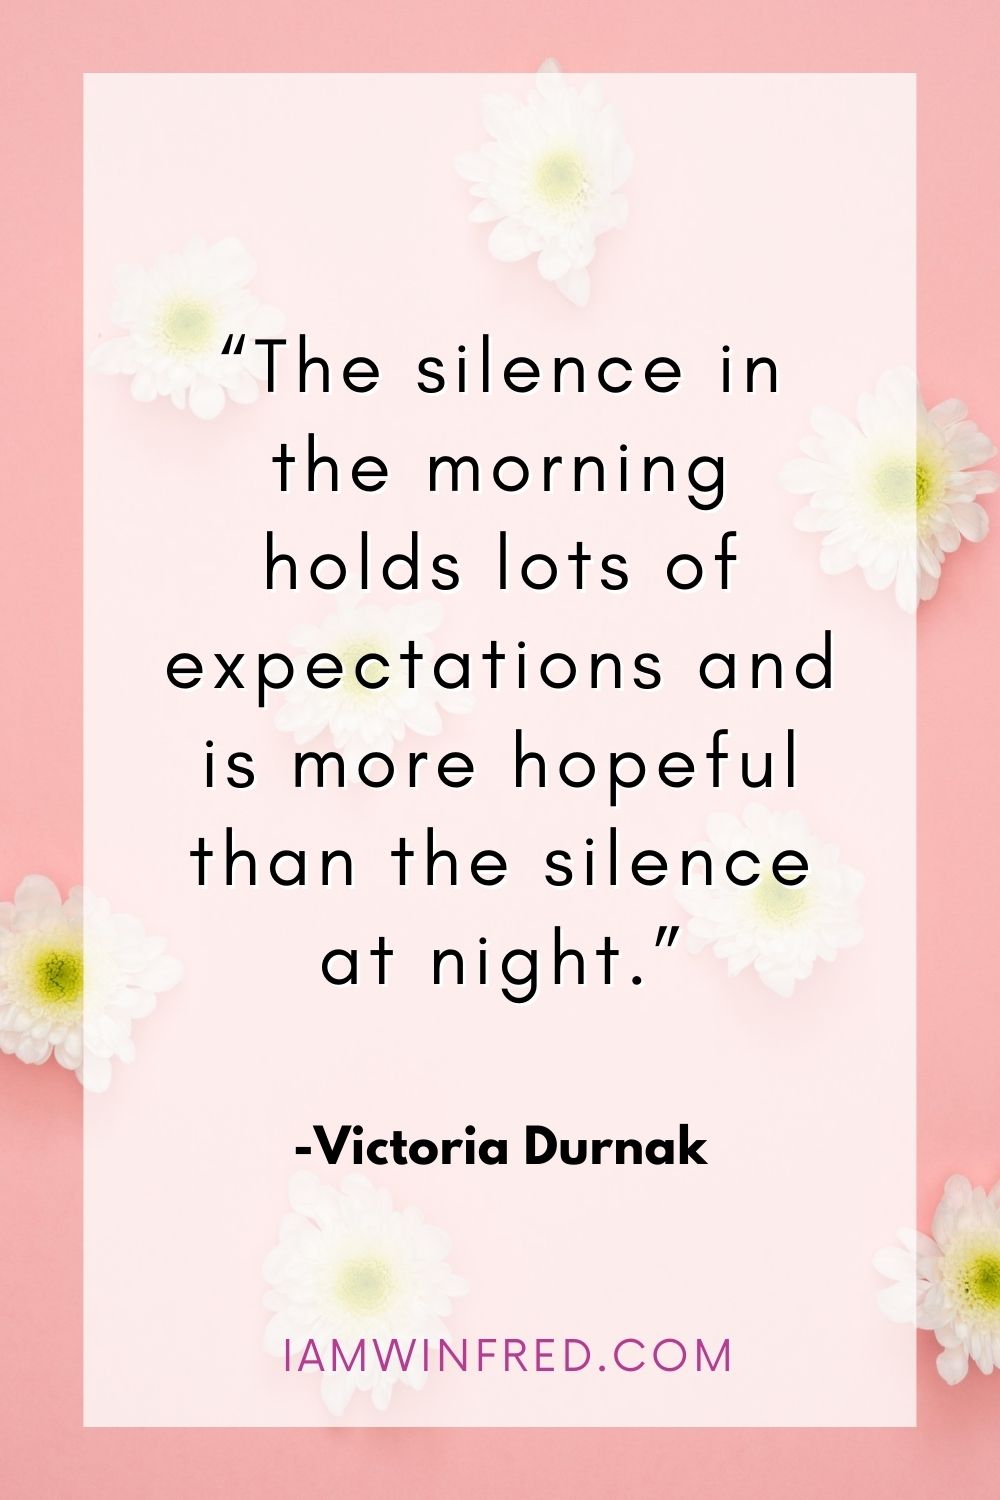 The Silence In The Morning Holds Lots Of Expectations And Is More Hopeful Than The Silence At Night.